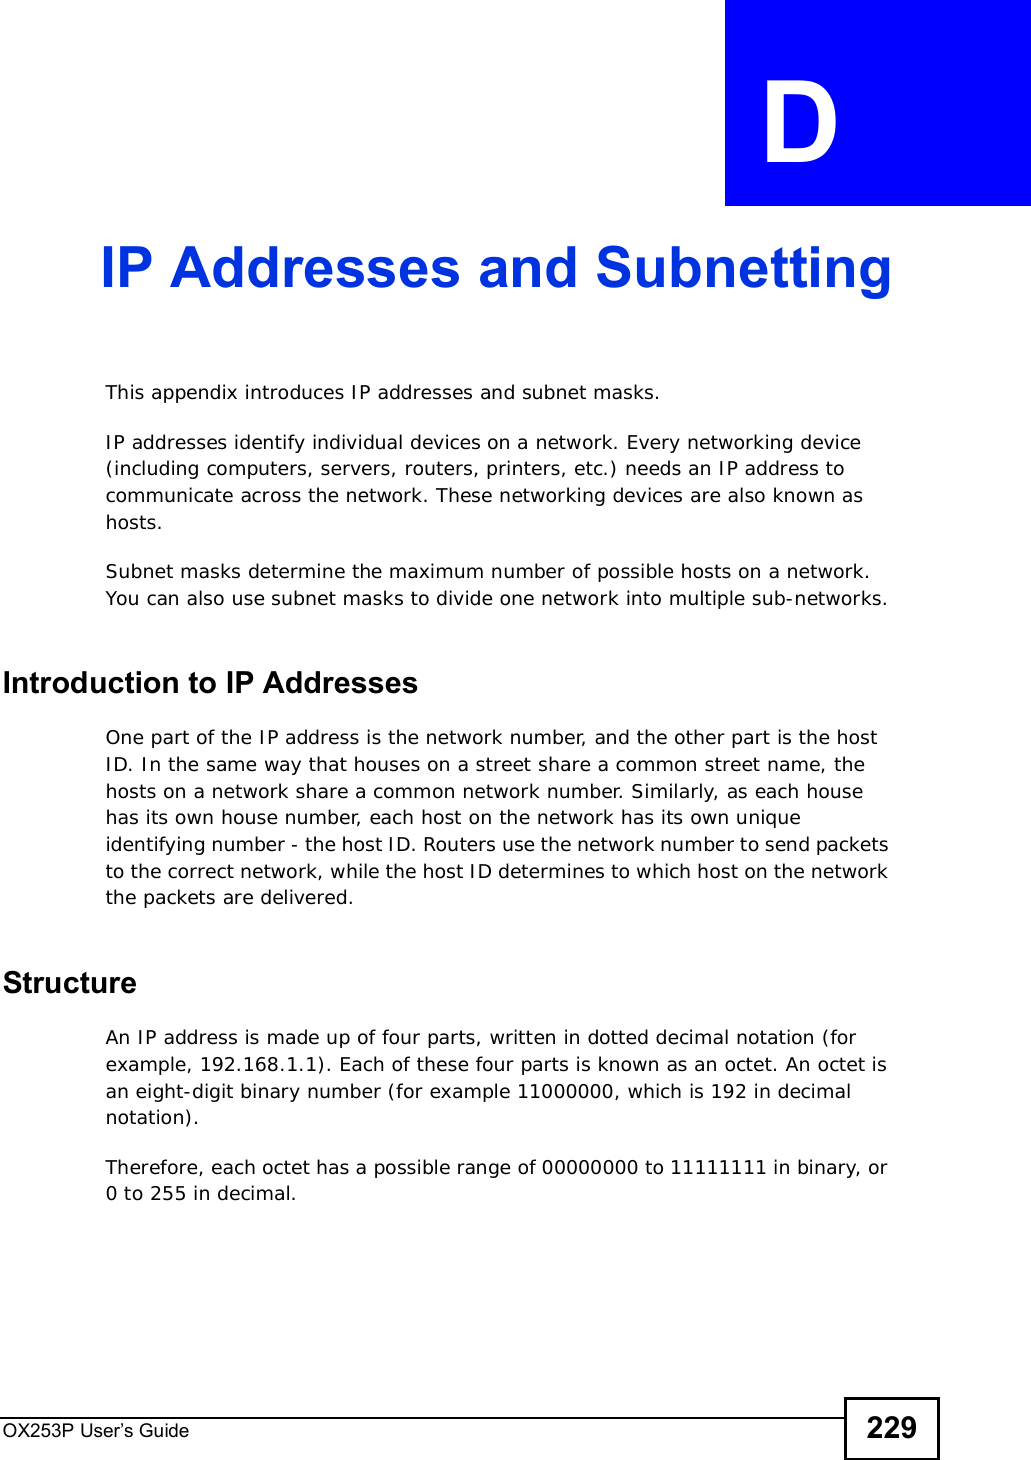 OX253P User’s Guide 229APPENDIX  D IP Addresses and SubnettingThis appendix introduces IP addresses and subnet masks. IP addresses identify individual devices on a network. Every networking device (including computers, servers, routers, printers, etc.) needs an IP address to communicate across the network. These networking devices are also known as hosts.Subnet masks determine the maximum number of possible hosts on a network. You can also use subnet masks to divide one network into multiple sub-networks.Introduction to IP AddressesOne part of the IP address is the network number, and the other part is the host ID. In the same way that houses on a street share a common street name, the hosts on a network share a common network number. Similarly, as each house has its own house number, each host on the network has its own unique identifying number - the host ID. Routers use the network number to send packets to the correct network, while the host ID determines to which host on the network the packets are delivered.StructureAn IP address is made up of four parts, written in dotted decimal notation (for example, 192.168.1.1). Each of these four parts is known as an octet. An octet is an eight-digit binary number (for example 11000000, which is 192 in decimal notation). Therefore, each octet has a possible range of 00000000 to 11111111 in binary, or 0 to 255 in decimal.